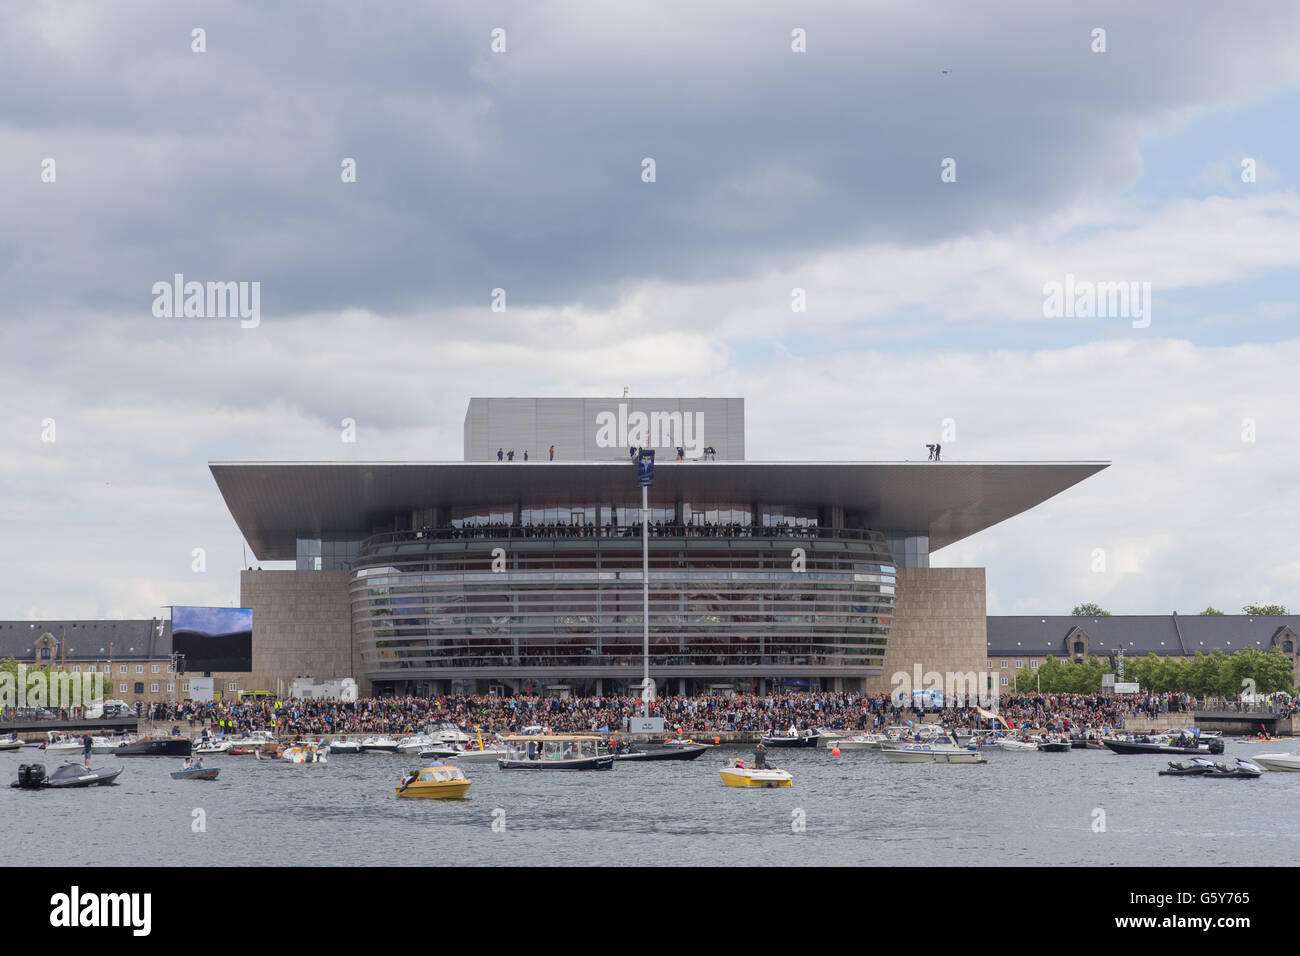 Copenhagen, Denmark - June 18, 2016: Cliff Diver ready to jump from Opera House at Red Bull cliff diving event. Stock Photo